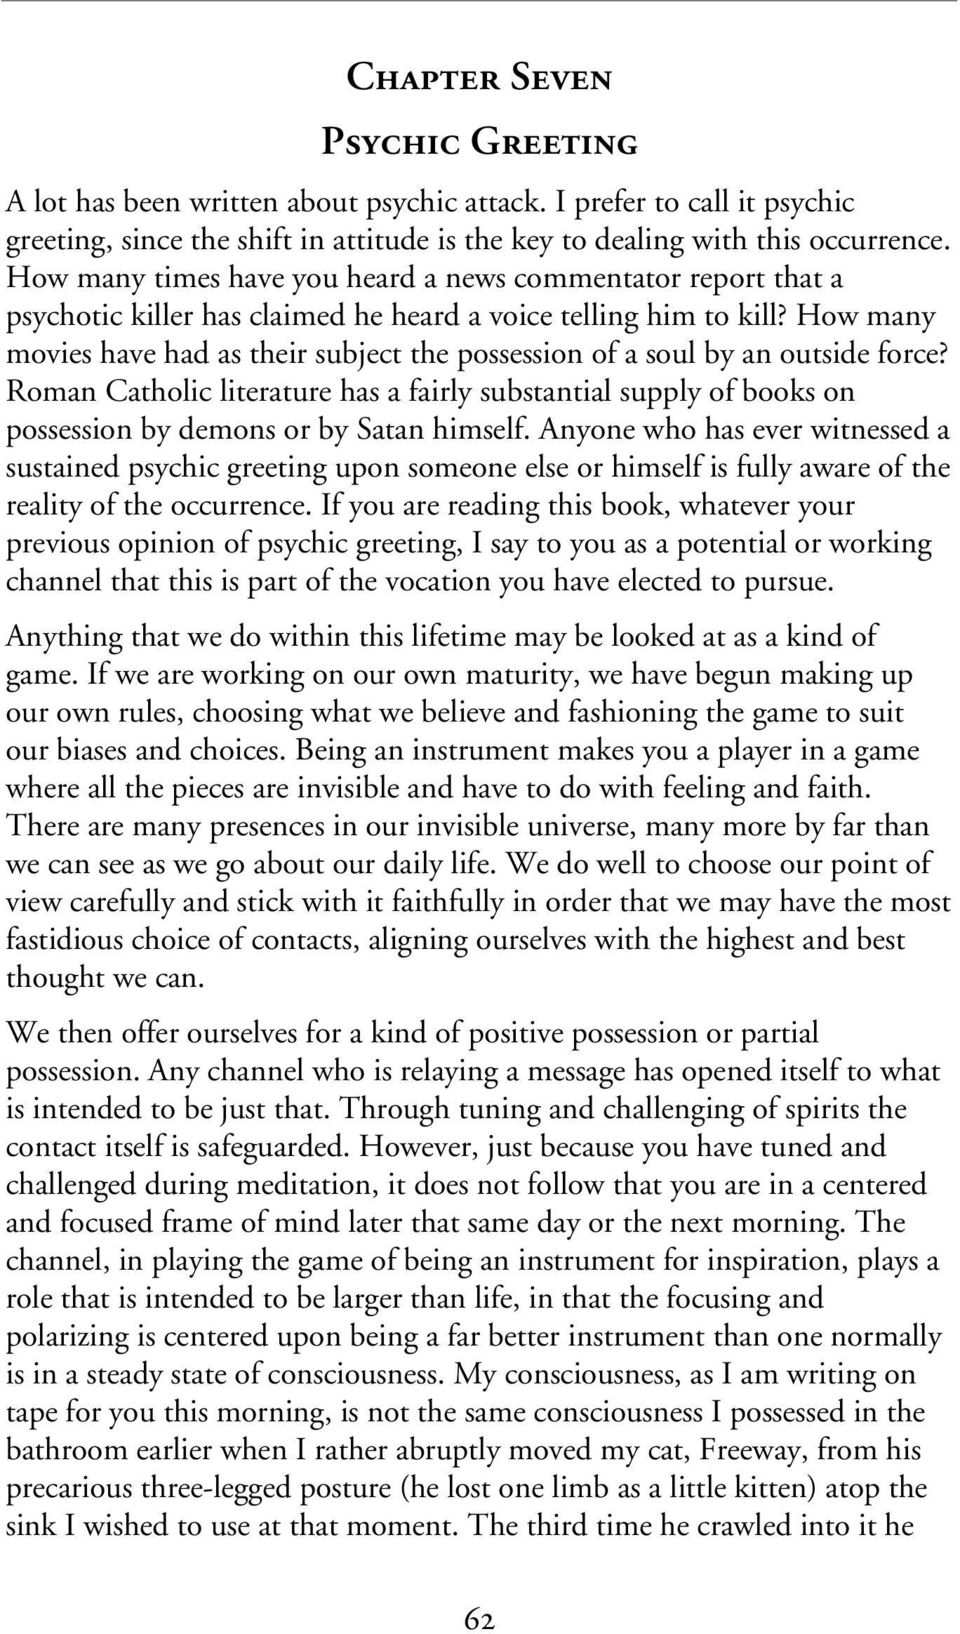 How many movies have had as their subject the possession of a soul by an outside force? Roman Catholic literature has a fairly substantial supply of books on possession by demons or by Satan himself.